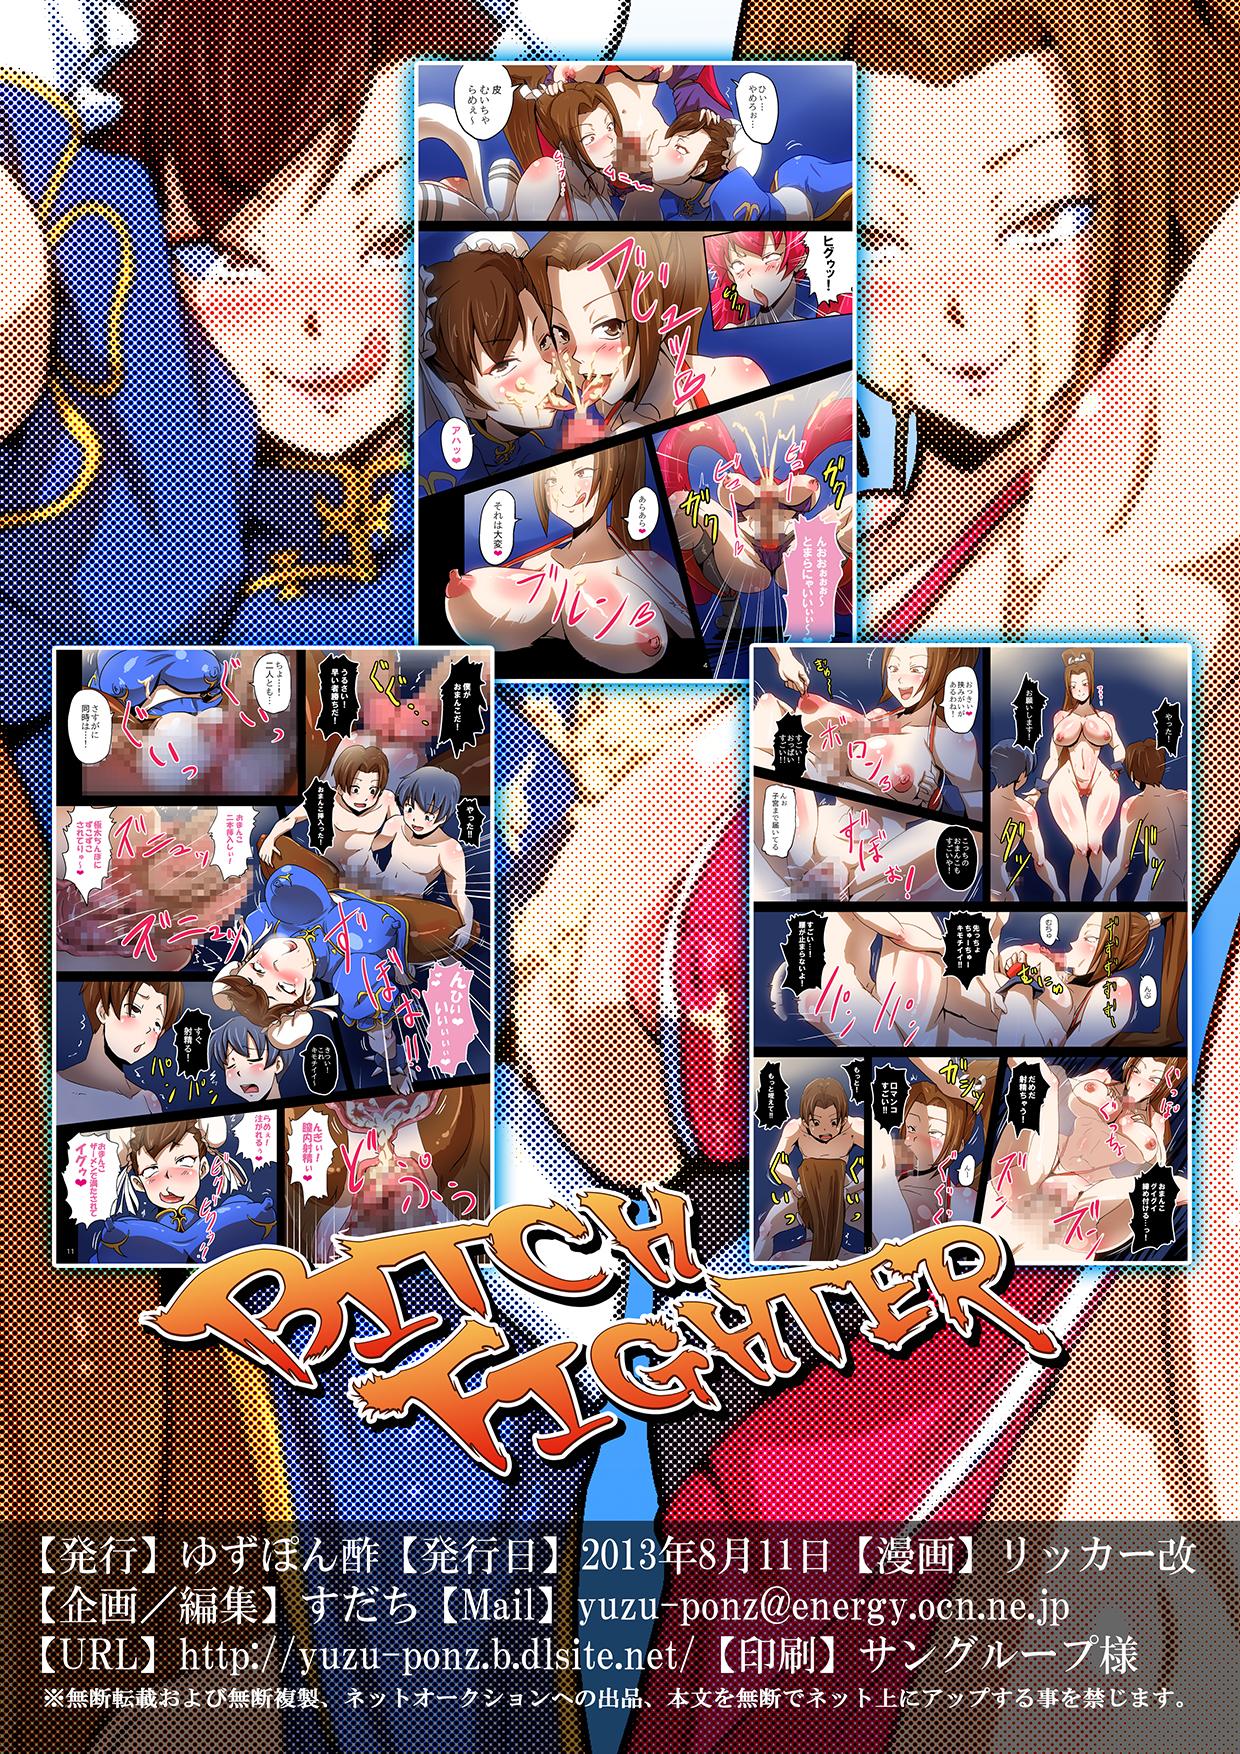 Piss BITCH FIGHTER - Street fighter King of fighters Interacial - Page 16